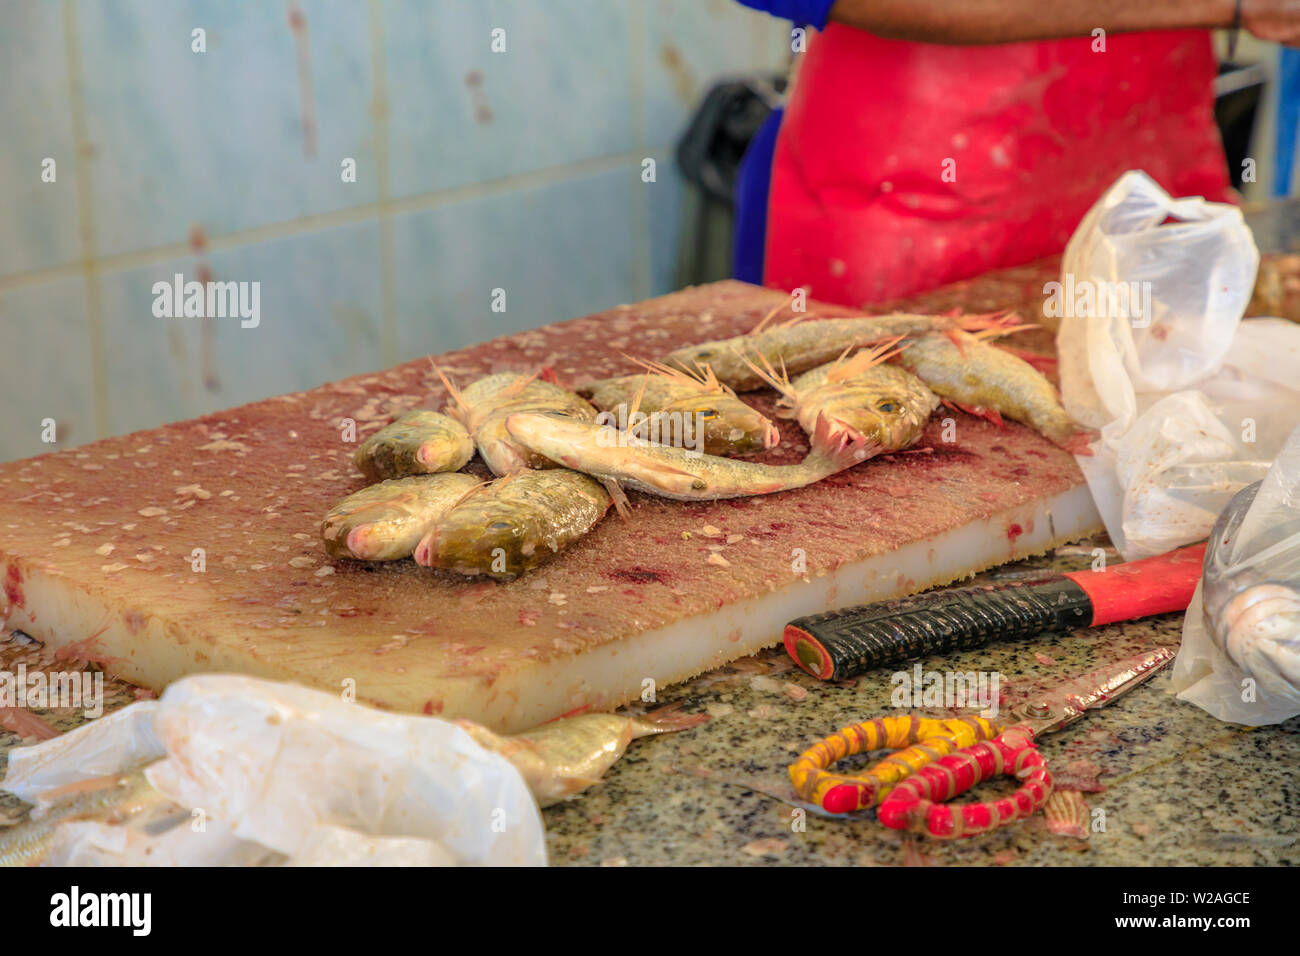 Details of pearly goatfish on wooden cutting board at Al Khor Fish Market in Qatar, Middle East, Arabian Peninsula. Stock Photo